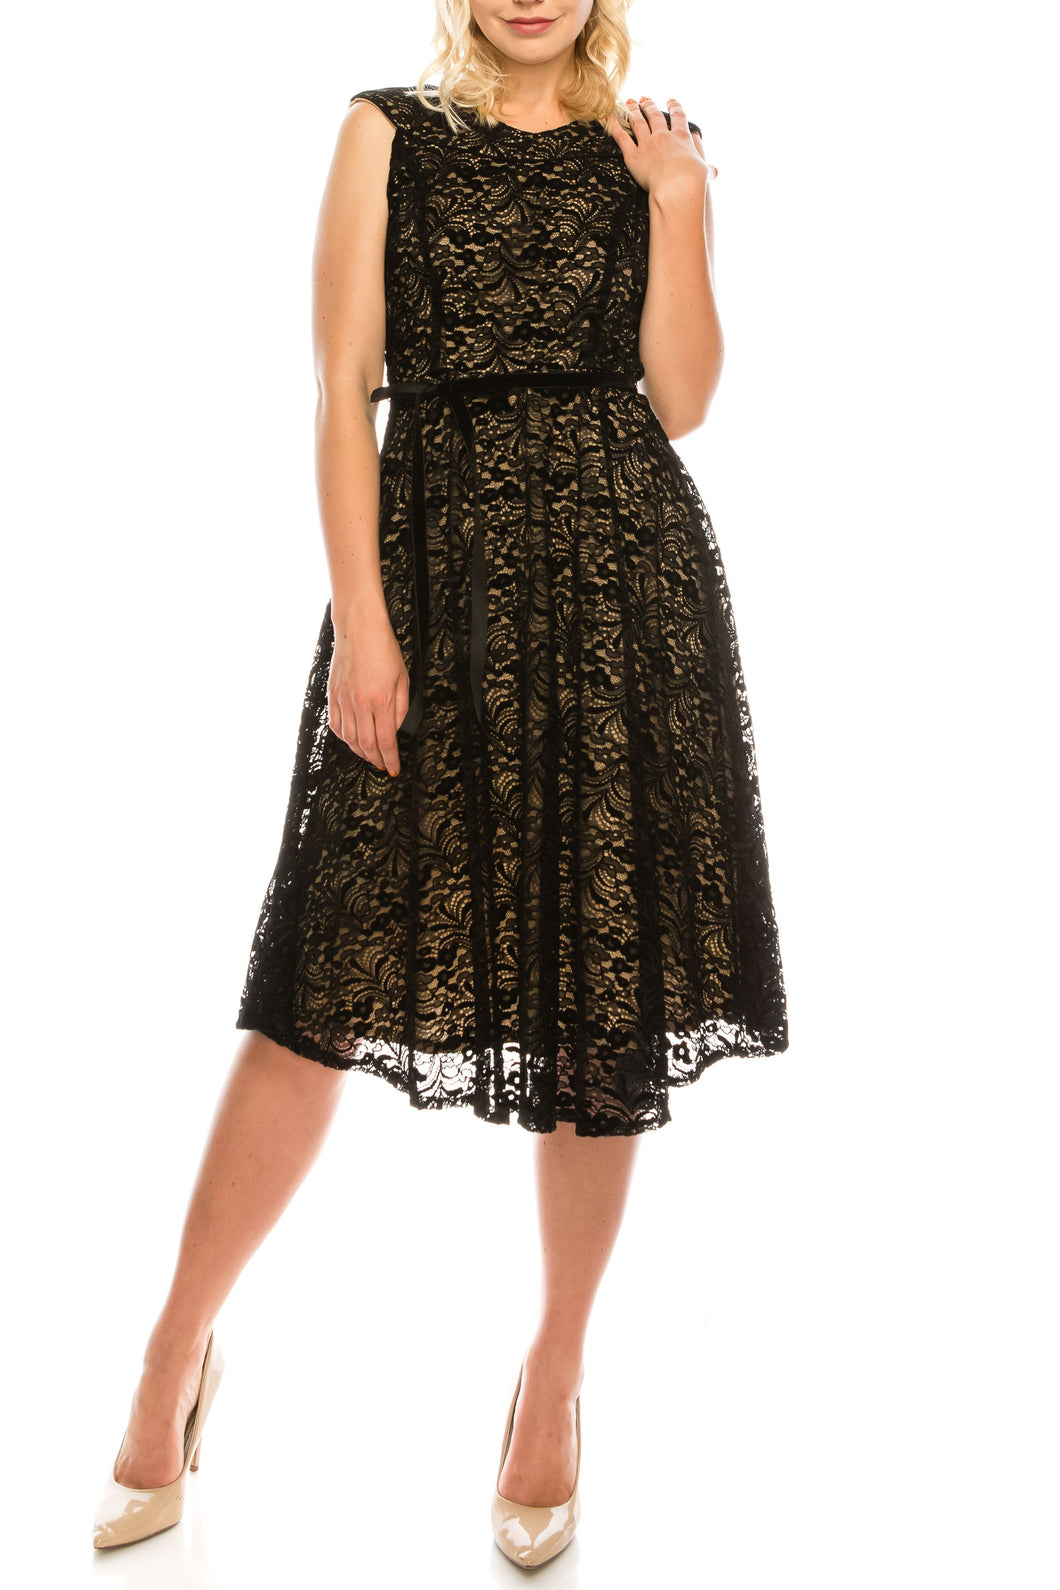 Maison Tara Velveted Lace Party Evening Dress, ONLY Sizes 4 & 6  Women's Cocktail Attire, Apparel